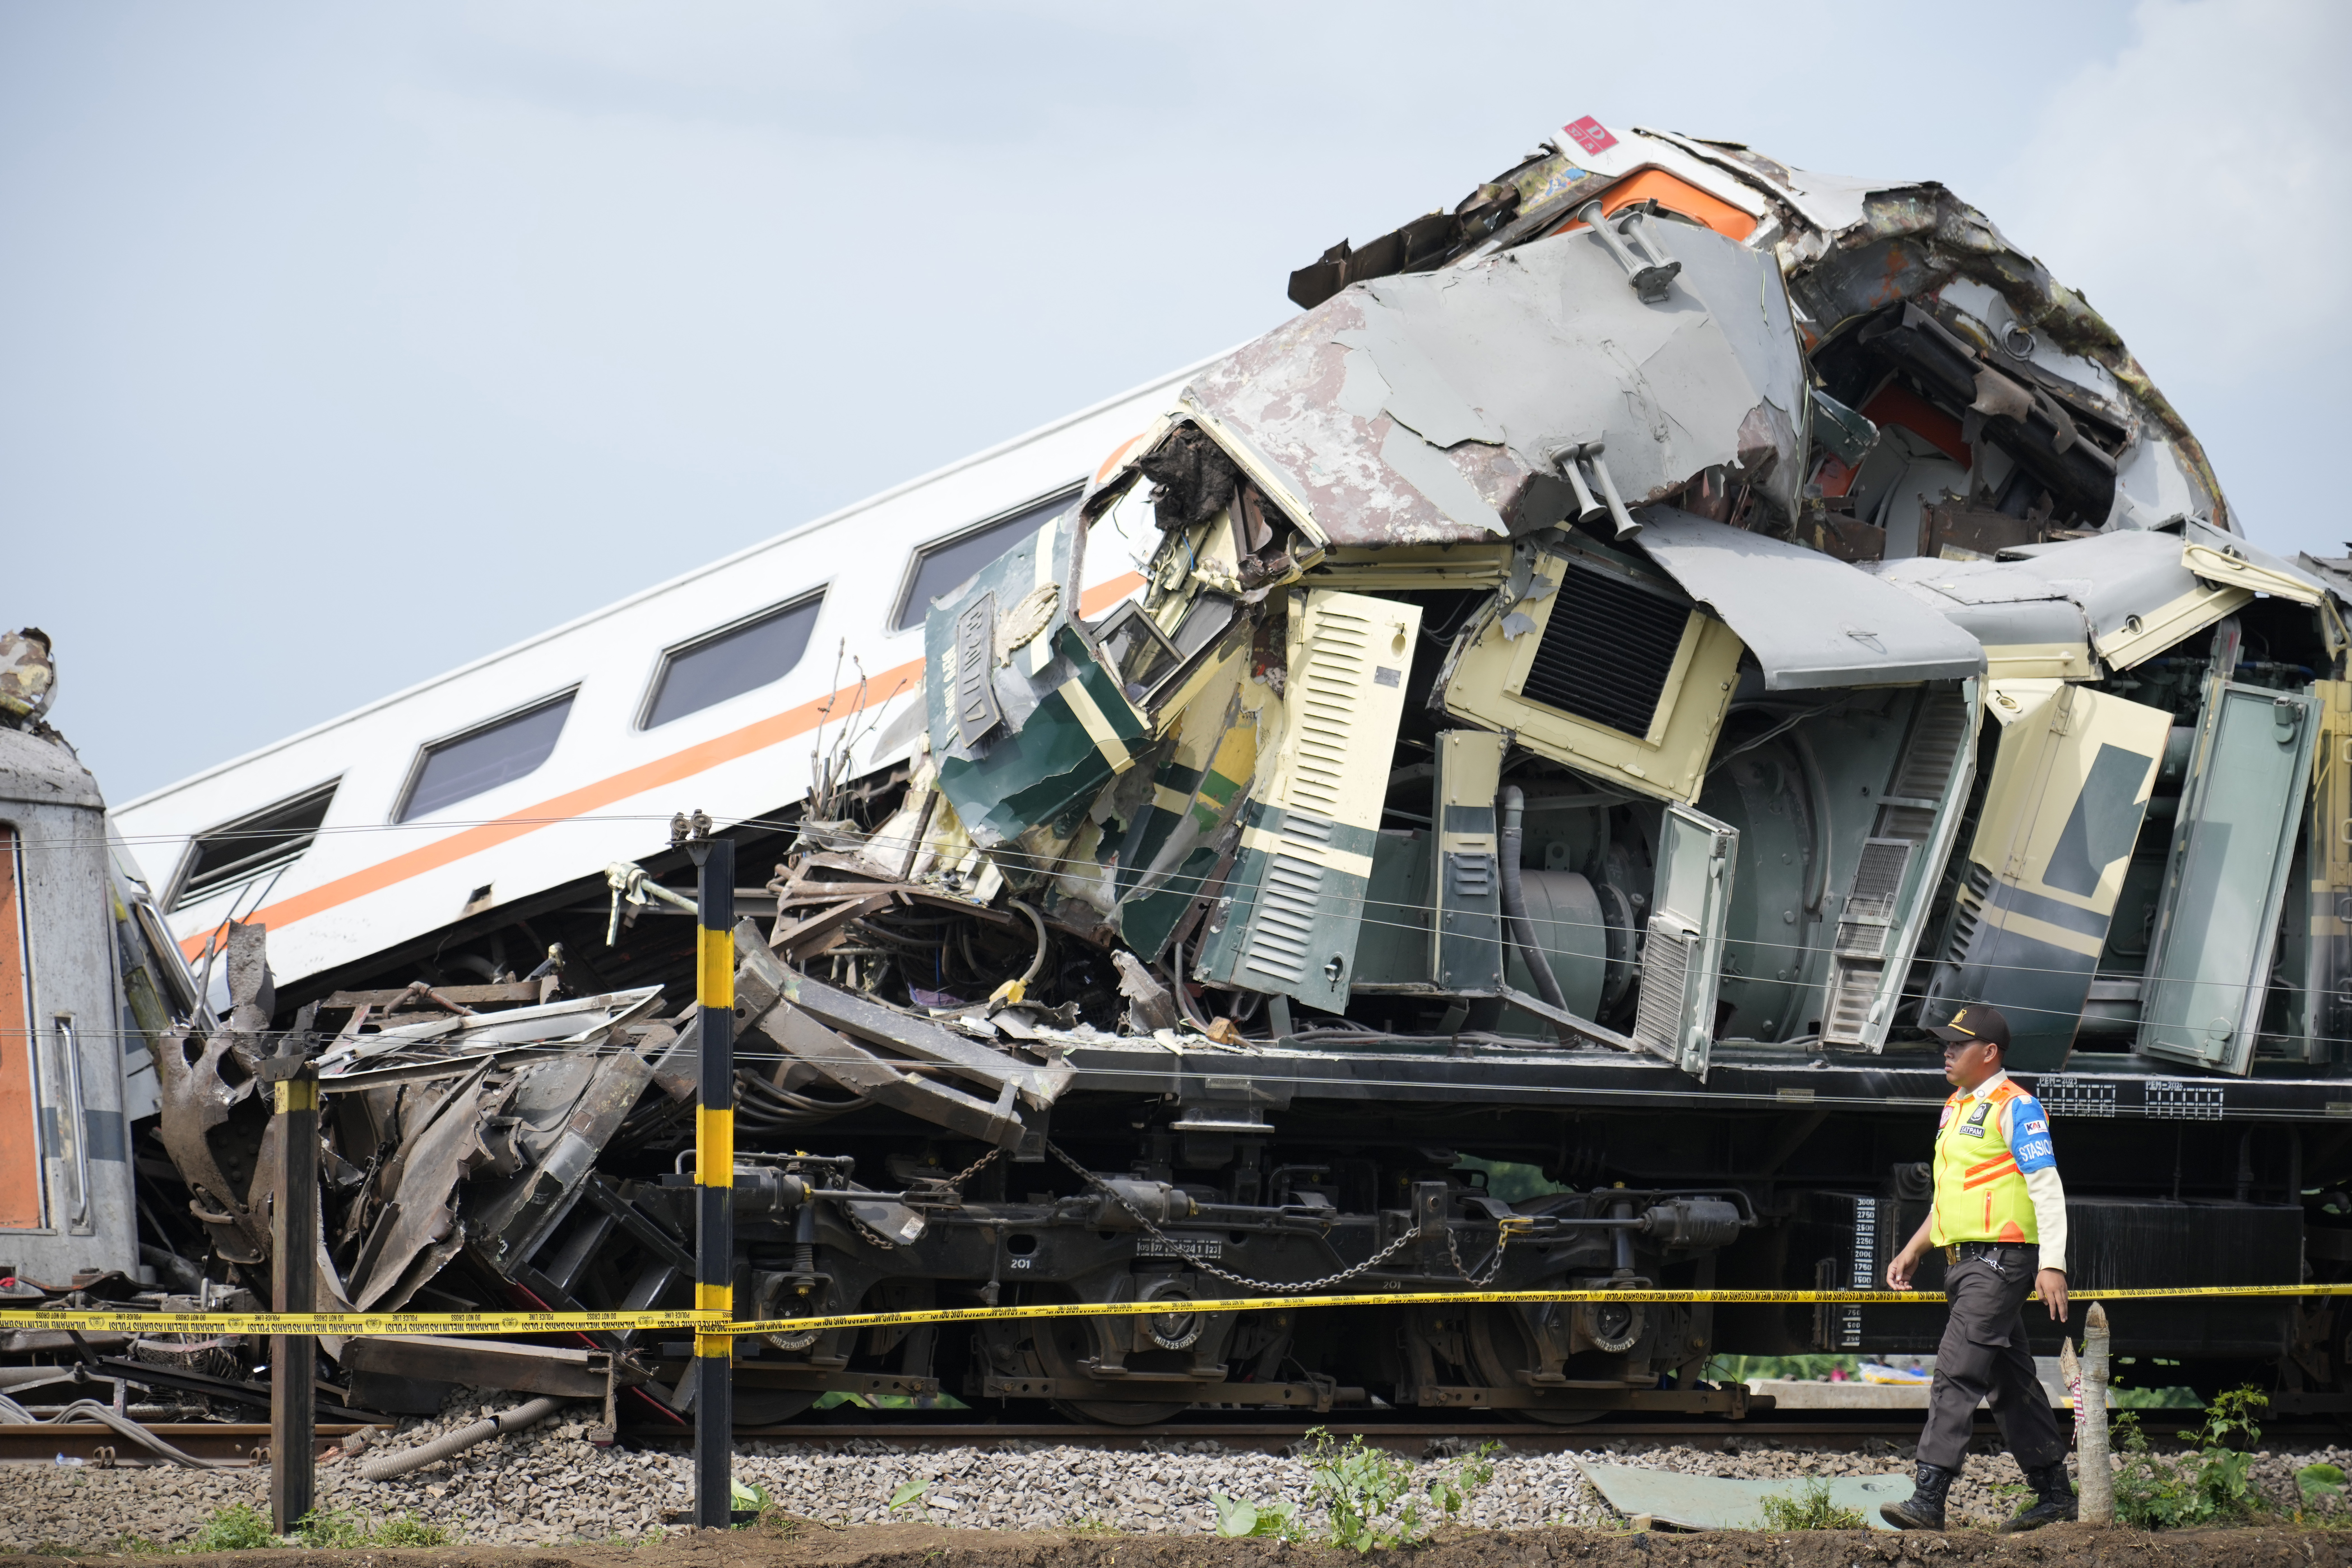 An inspector walks near the wreckage after the collision between two trains in Cicalengka, West Java, Indonesia, Friday, Jan. 5, 2024. The trains collided on Indonesia's main island of Java on Friday, causing several carriages to buckle and overturn, officials said. (AP Photo/Achmad Ibrahim)